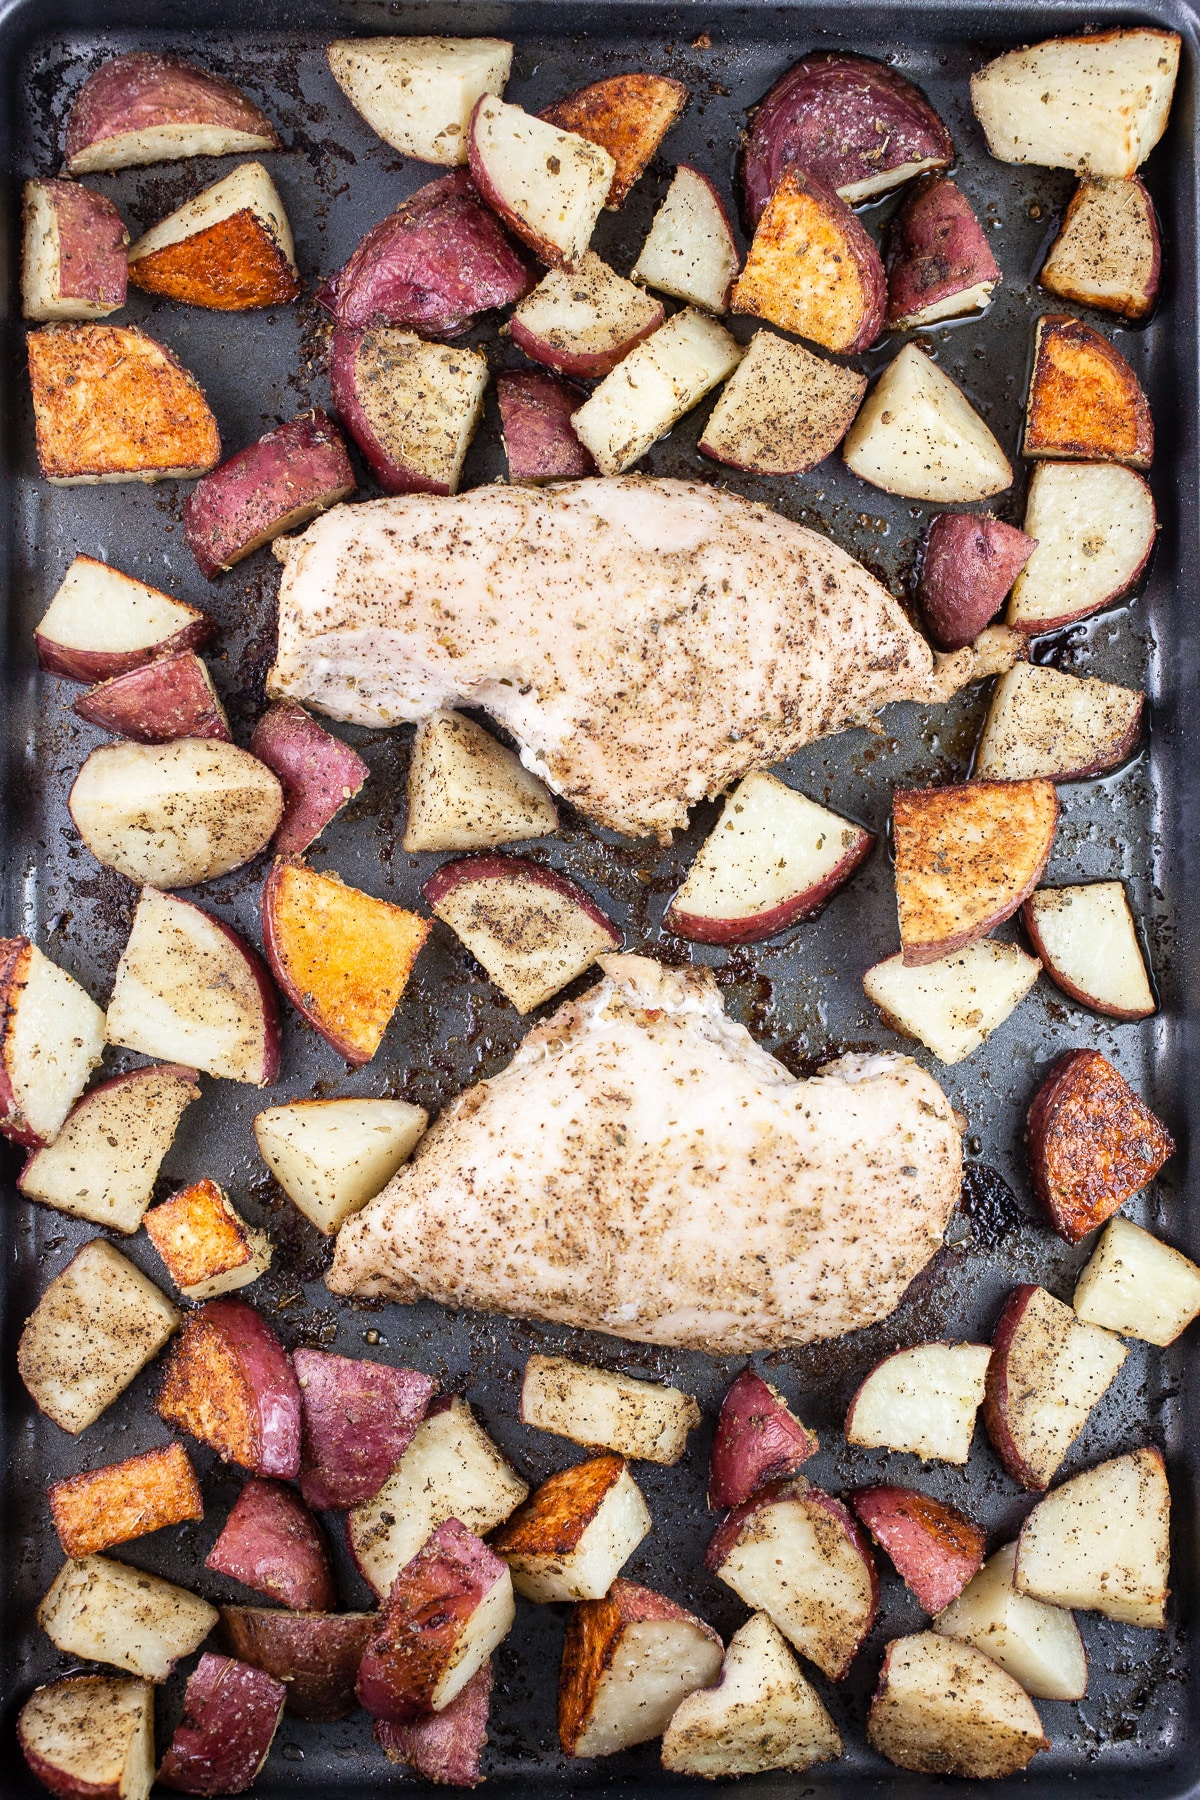 Cooked chicken breasts and diced red potatoes on baking sheet.